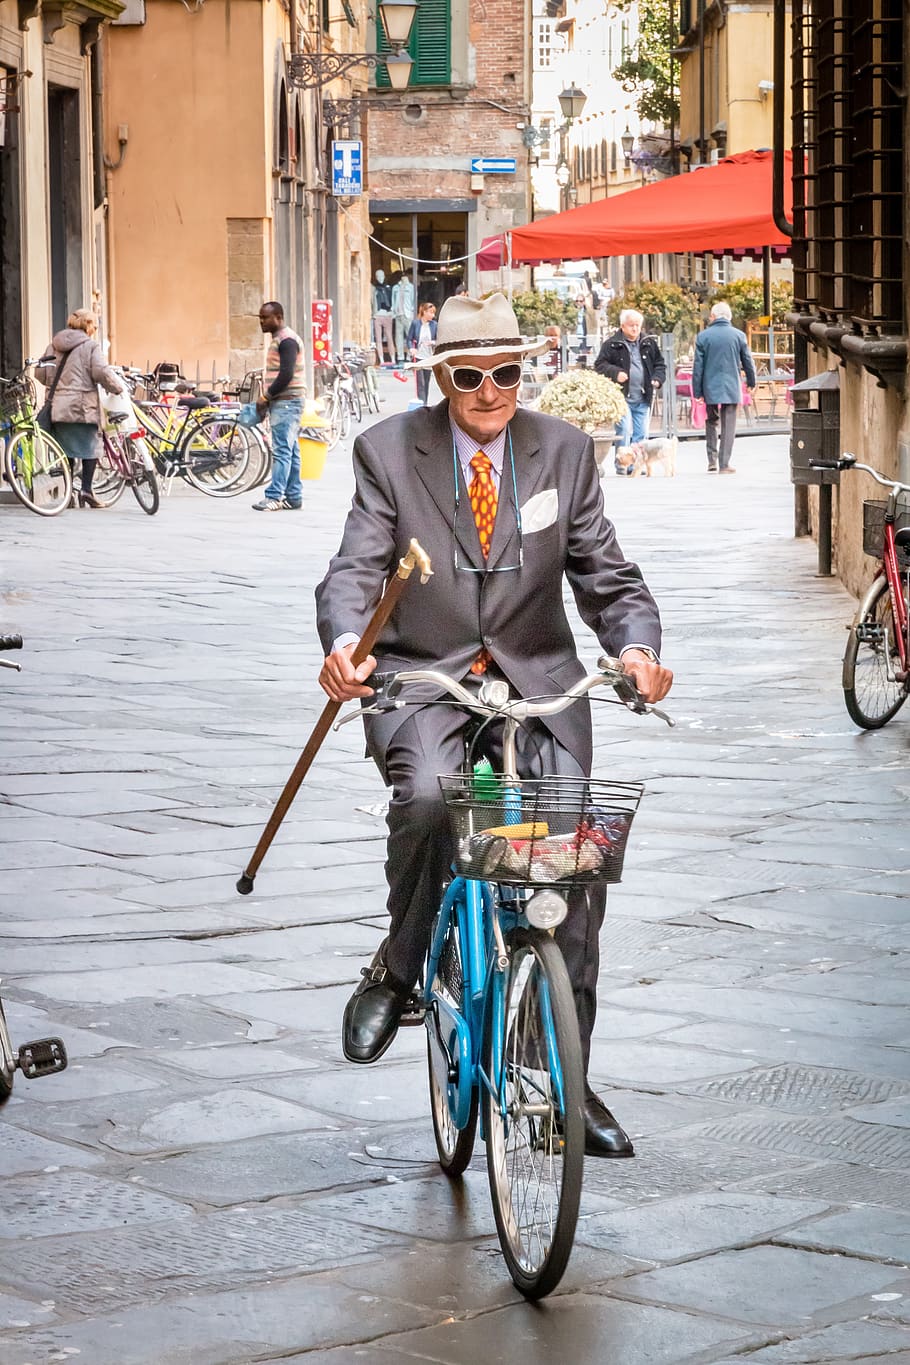 tuscany, italy, tourism, old, bicyclist's, streets, bicycle, transportation, city, architecture